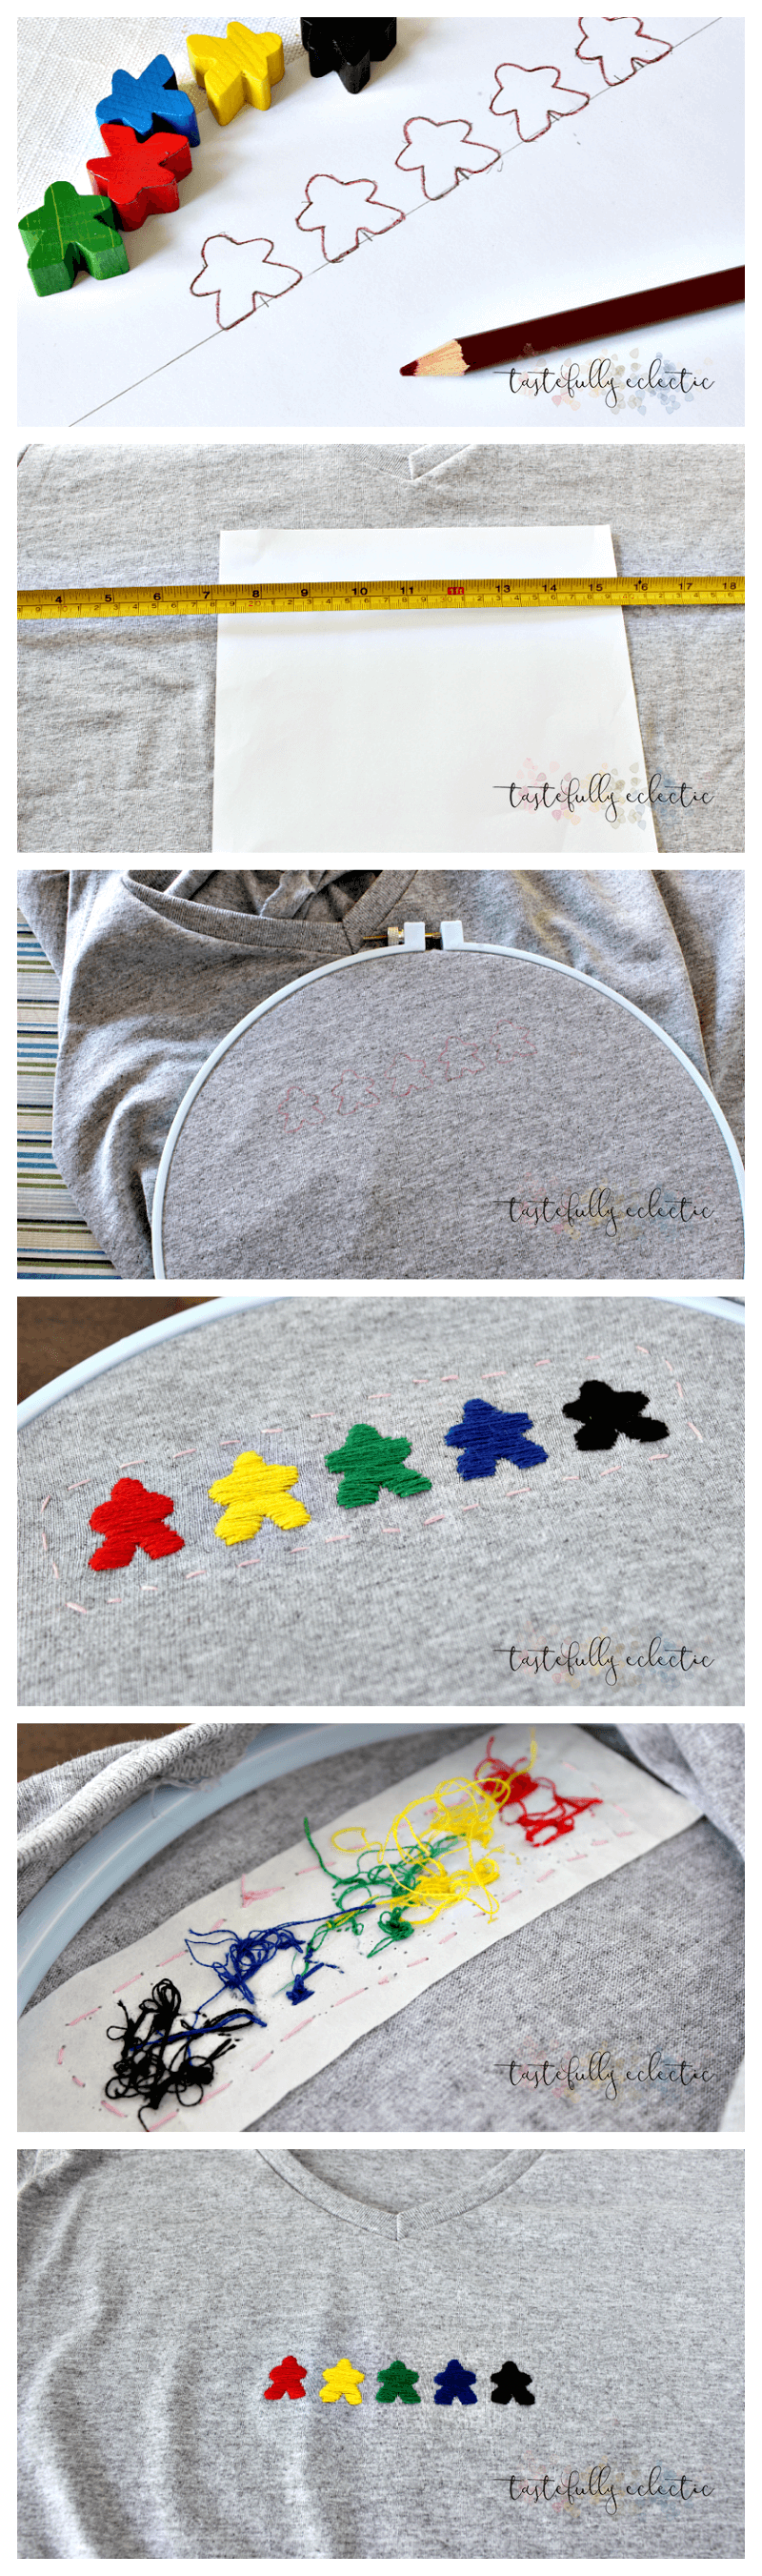 TableTop Day Meeple T-Shirt Embroidery